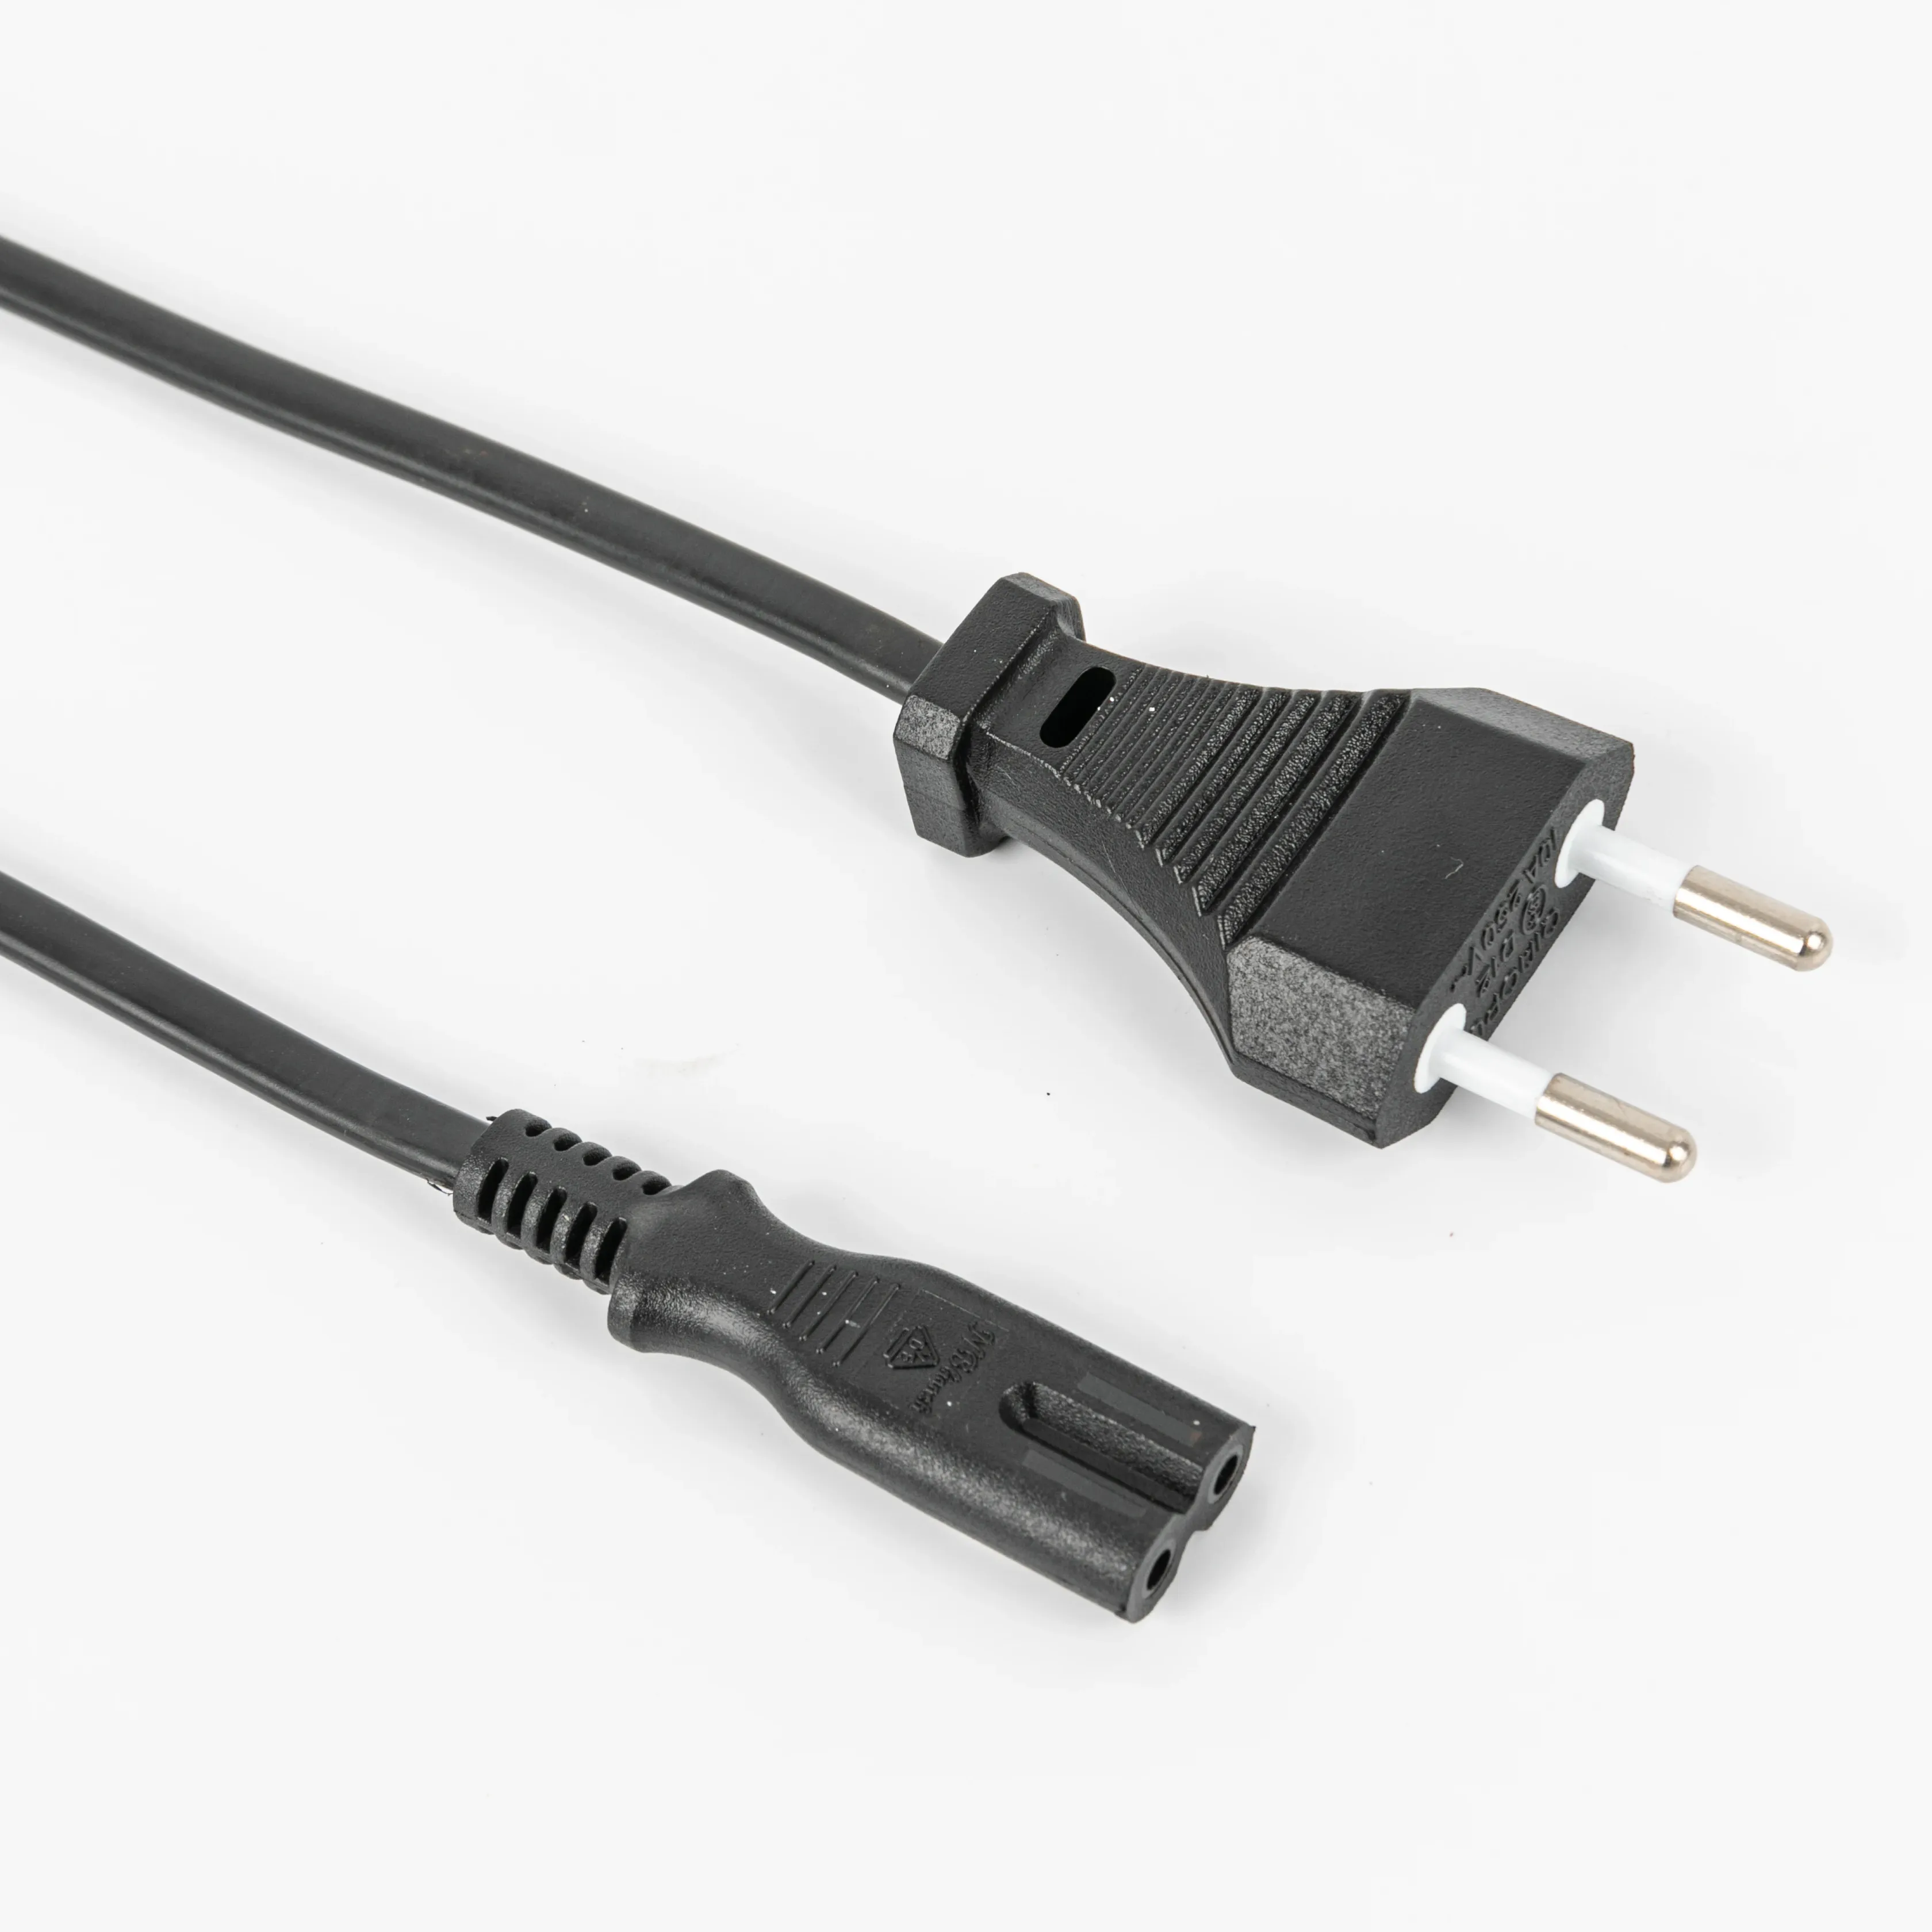 2 prong power cable for eu PVC Standard Flexible H03VVH2-F 2x0.75mm2 C7 Customized Home Appliance Copper CEE IEC